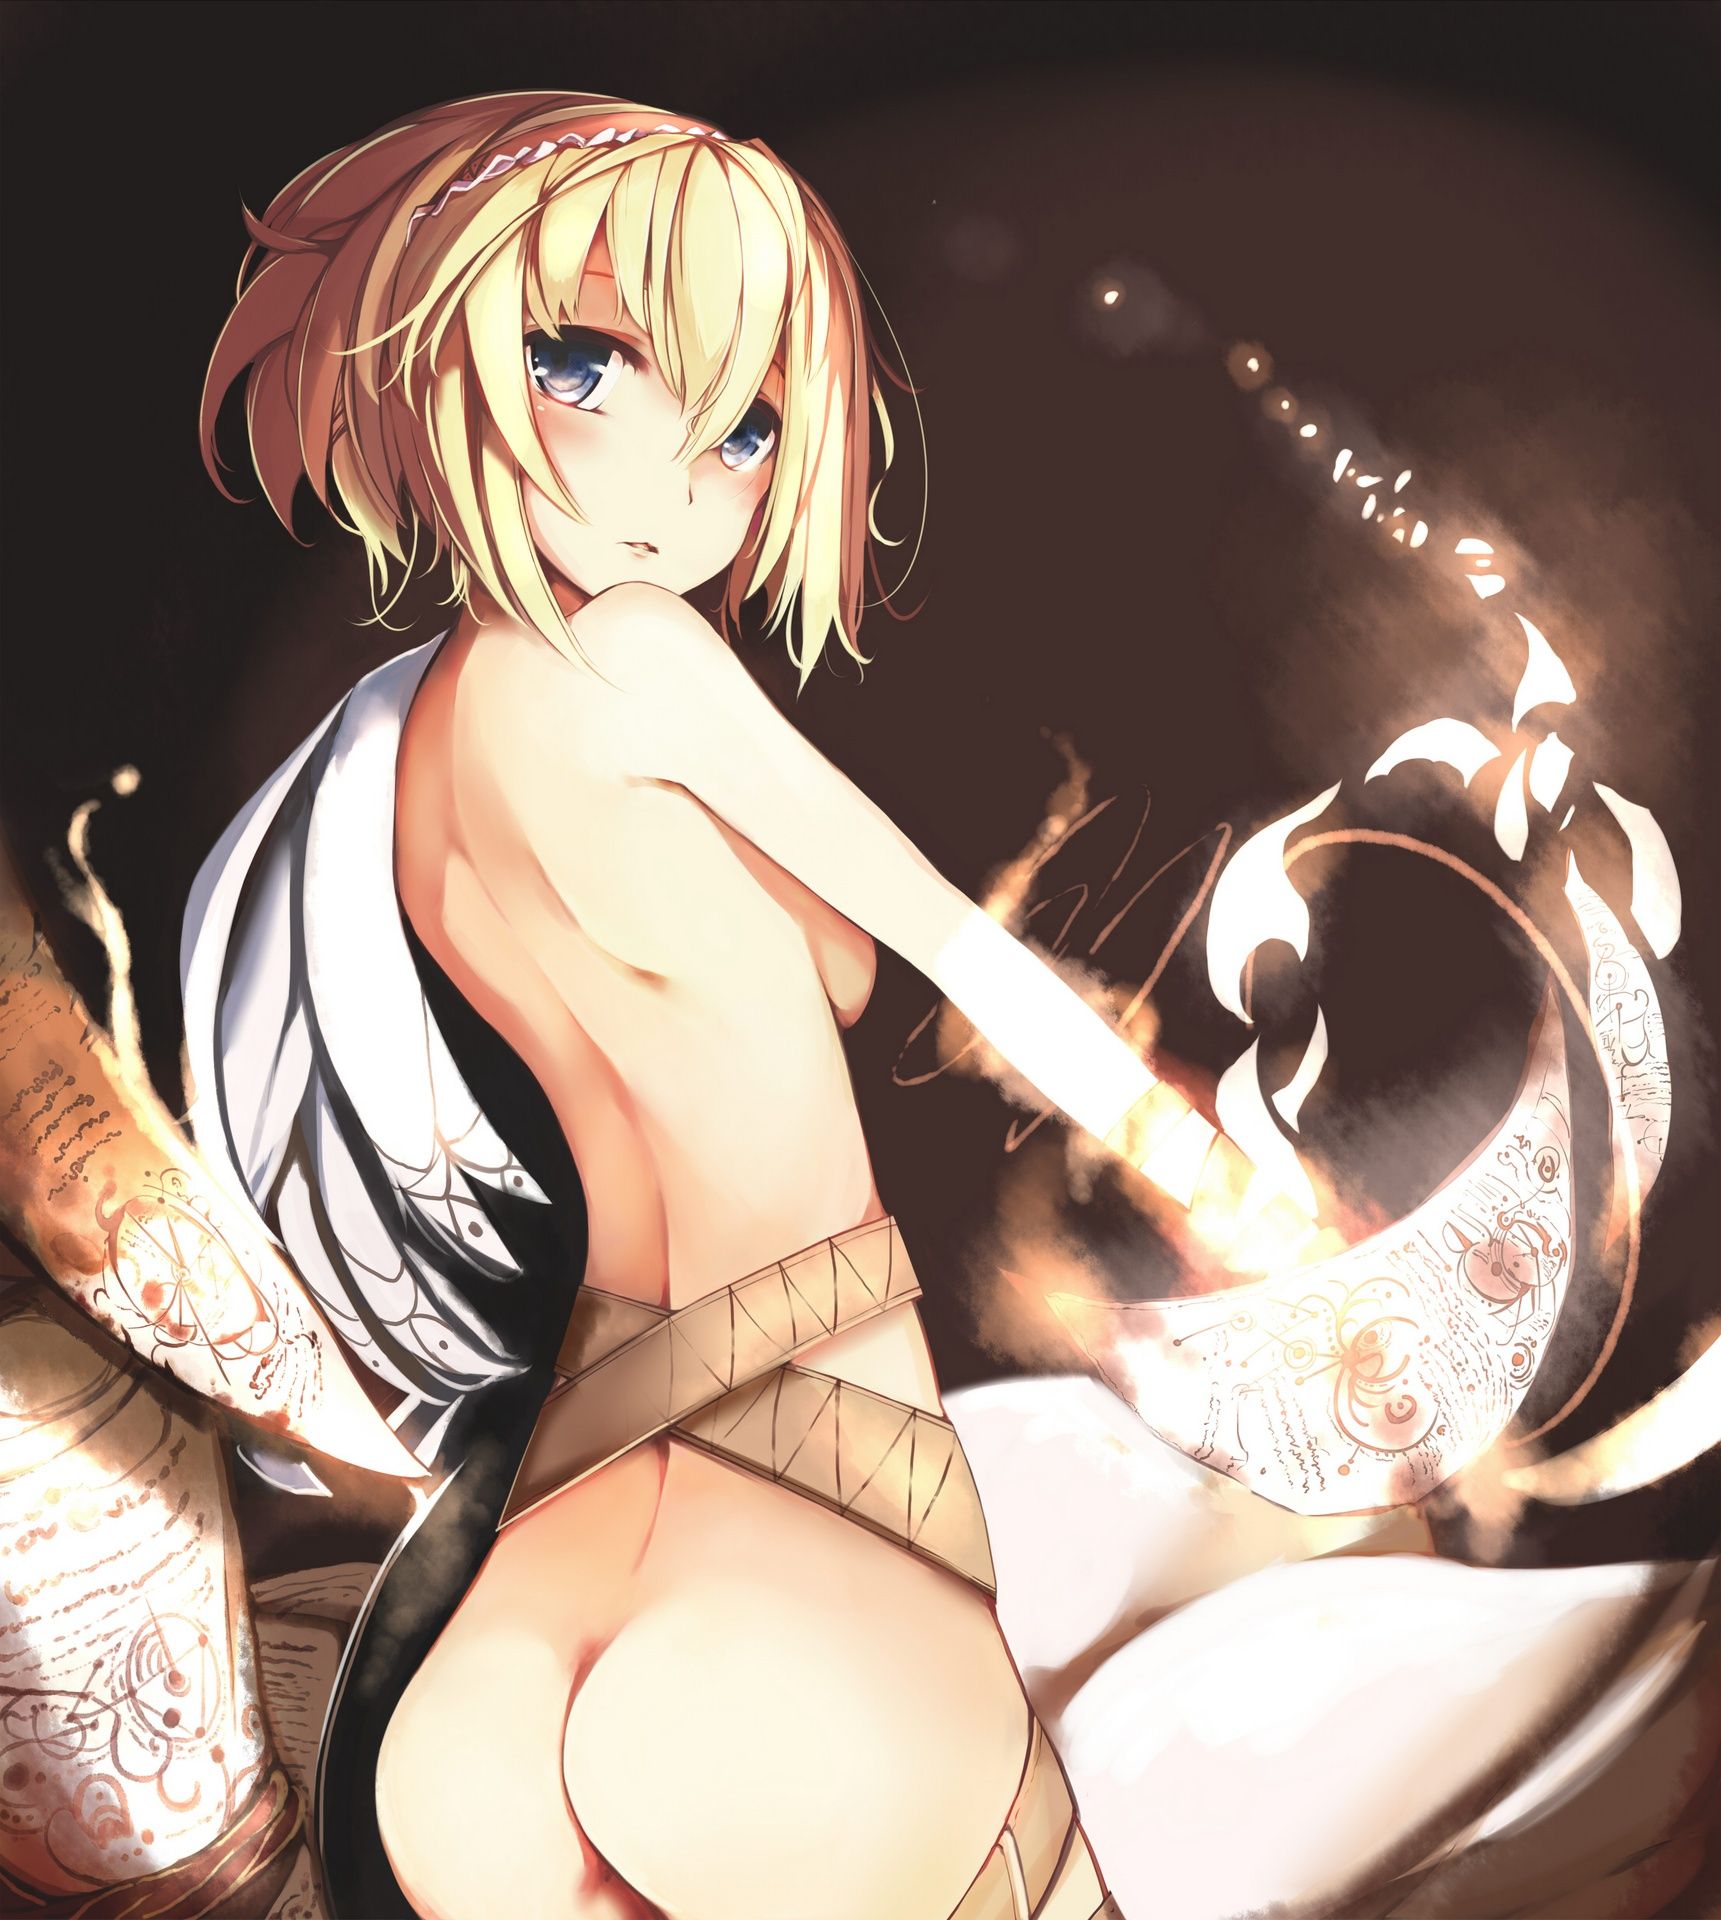 Charm of the touhou Project examined in erotic pictures 5